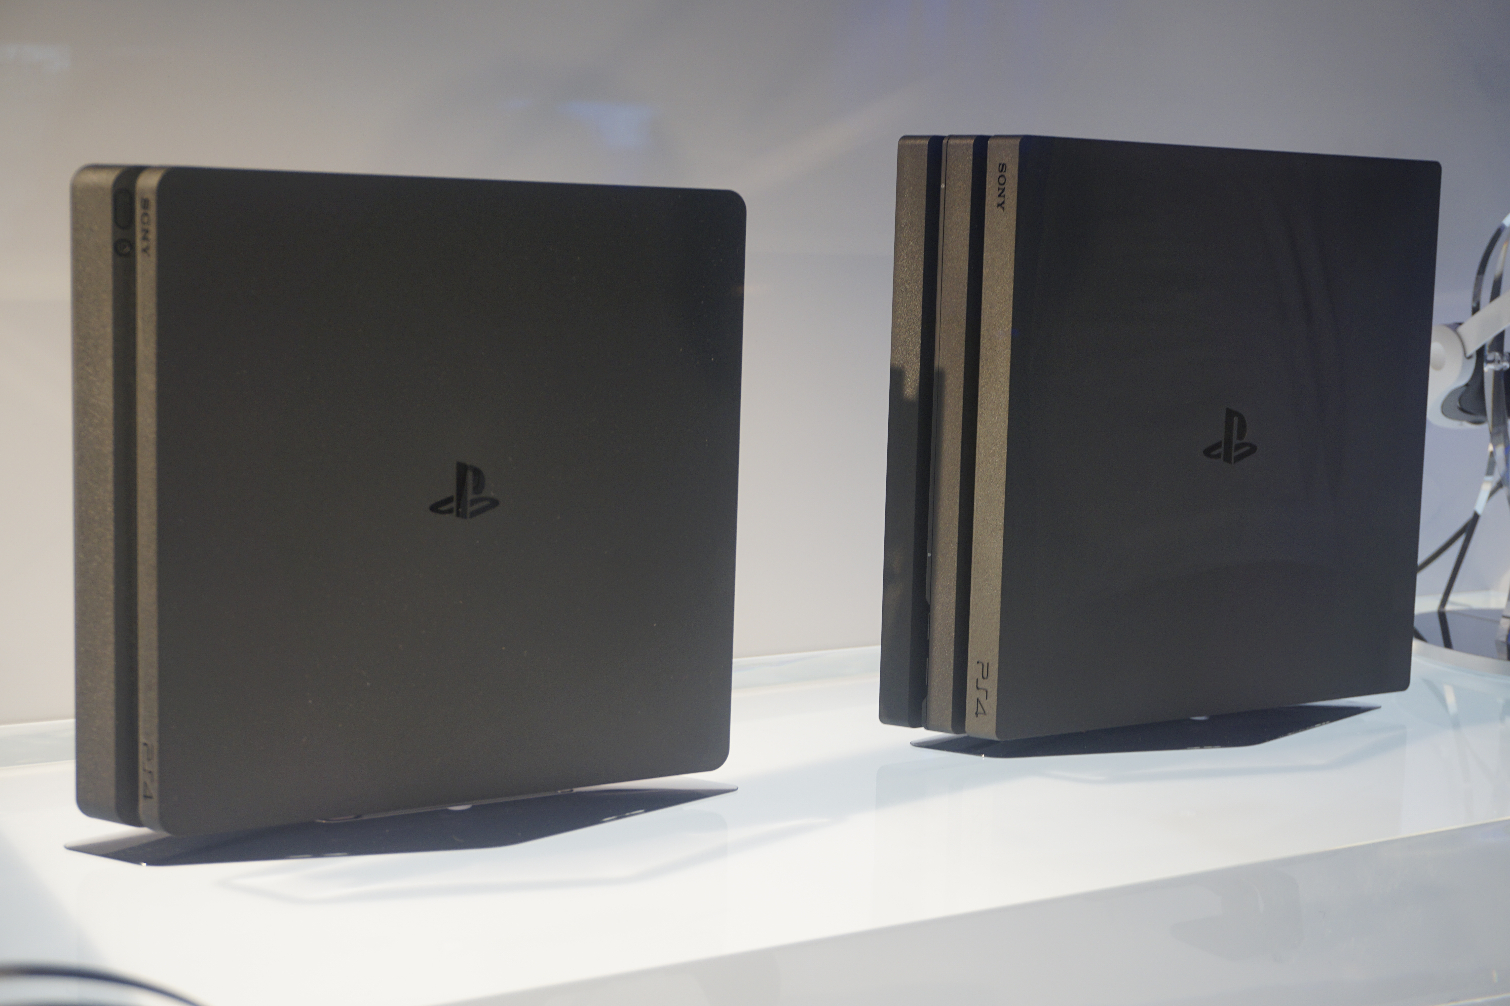 vedtage nuttet Wings PS4 Pro vs. PS4 Slim: Which PlayStation is Right For You? | Tom's Guide